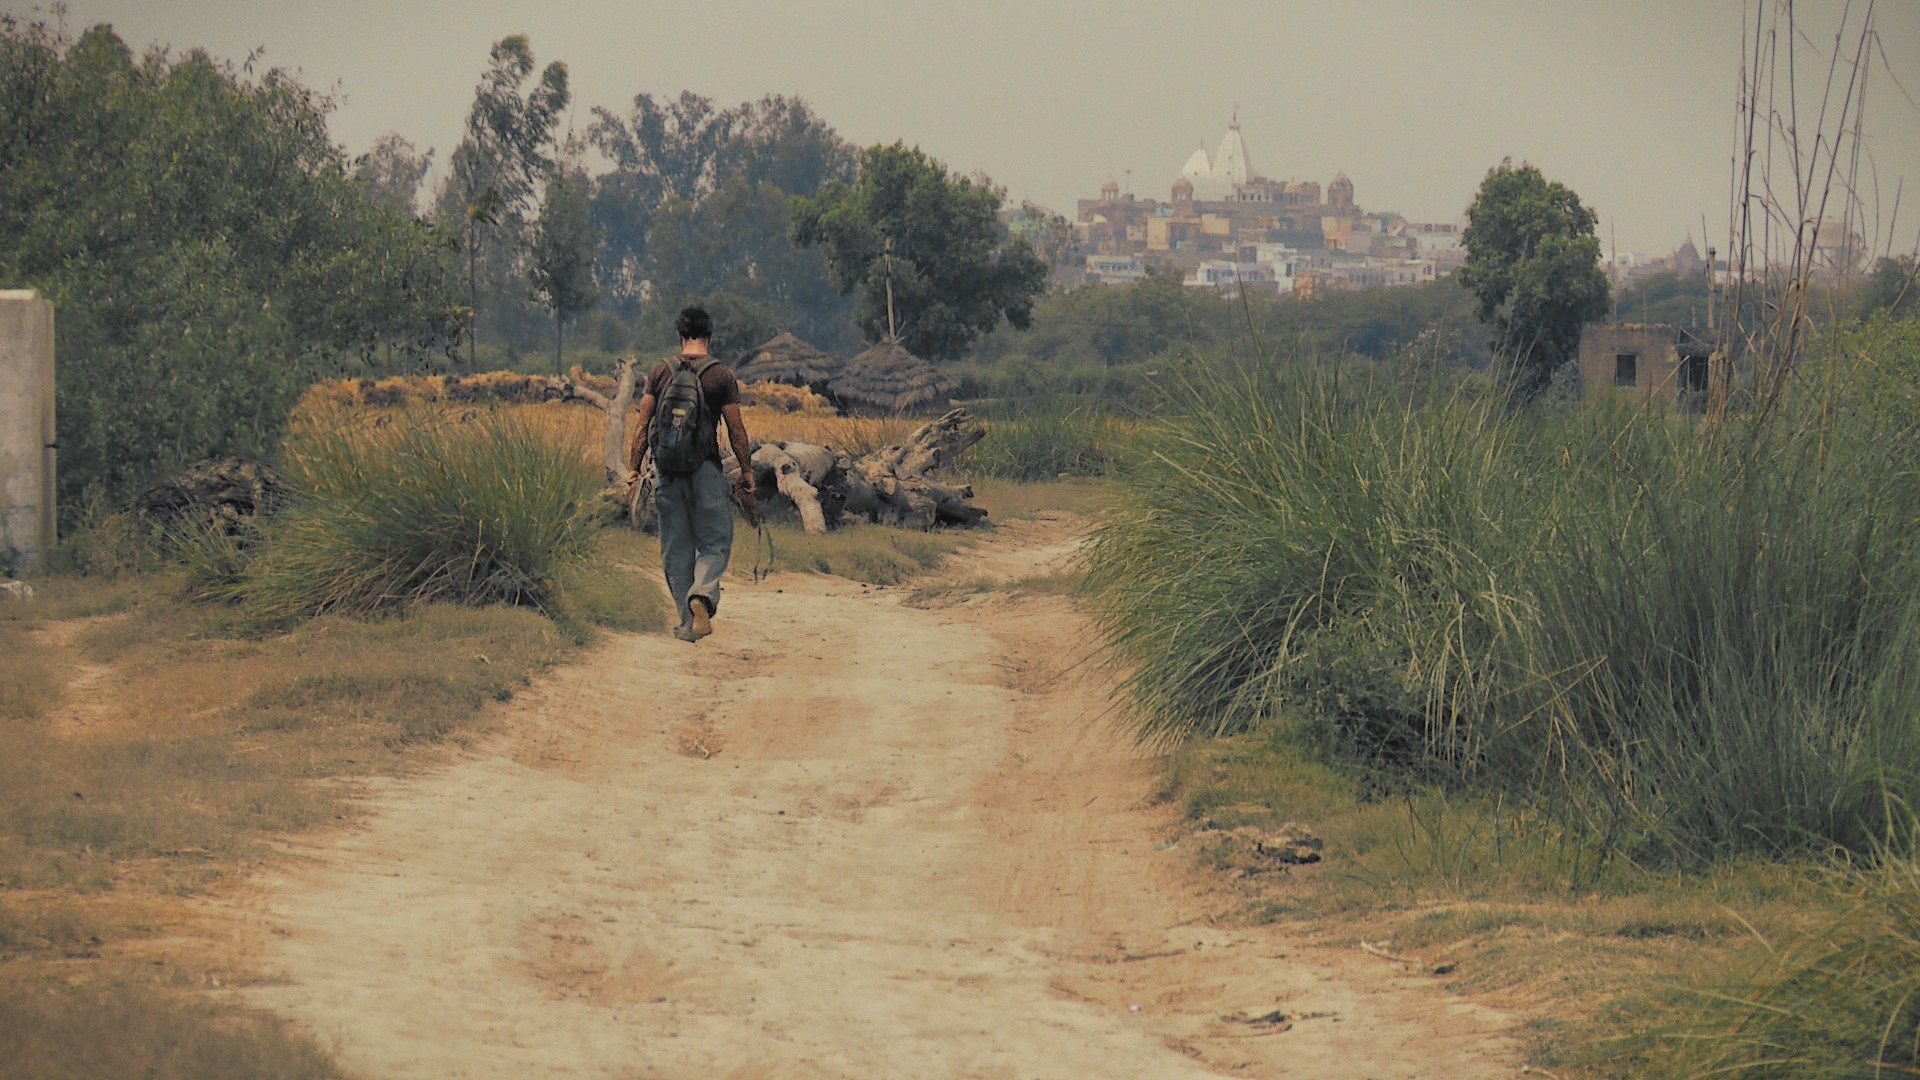 It's never too late to start walking in the right direction. Listen to what the world tells you, trust your guts to choose a path with heart. Sean Fletcher walks down the rural path by Nandagram, a still from the award-winning film 'Reconnection'.